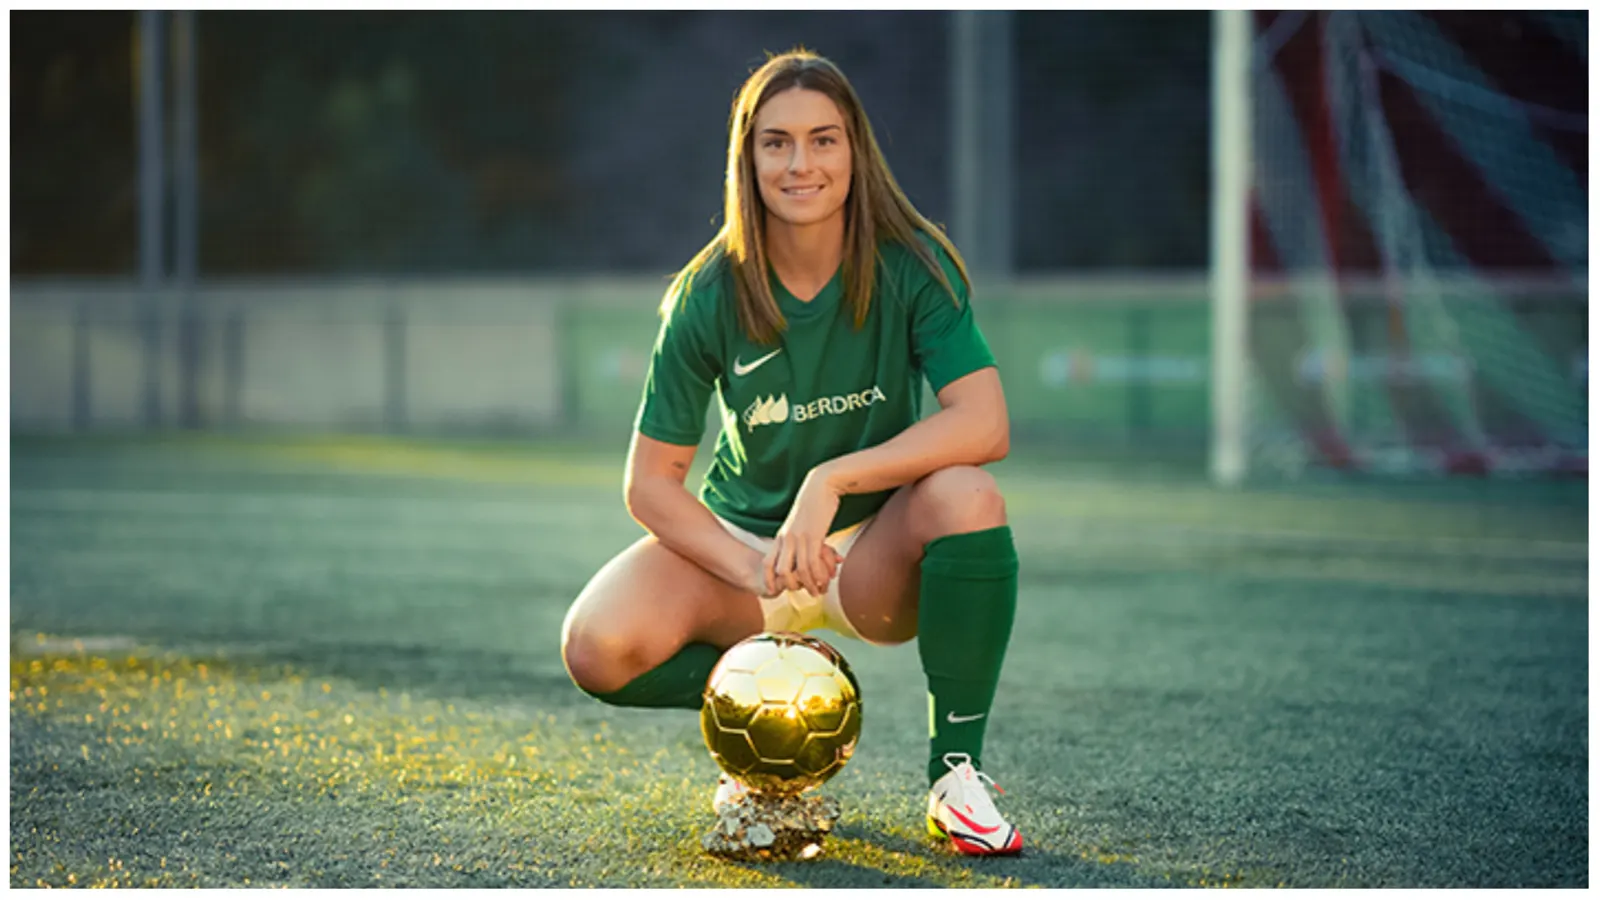 Alexia Putellas Age, Height, Partner, Stats, Awards, Injury, Family and More